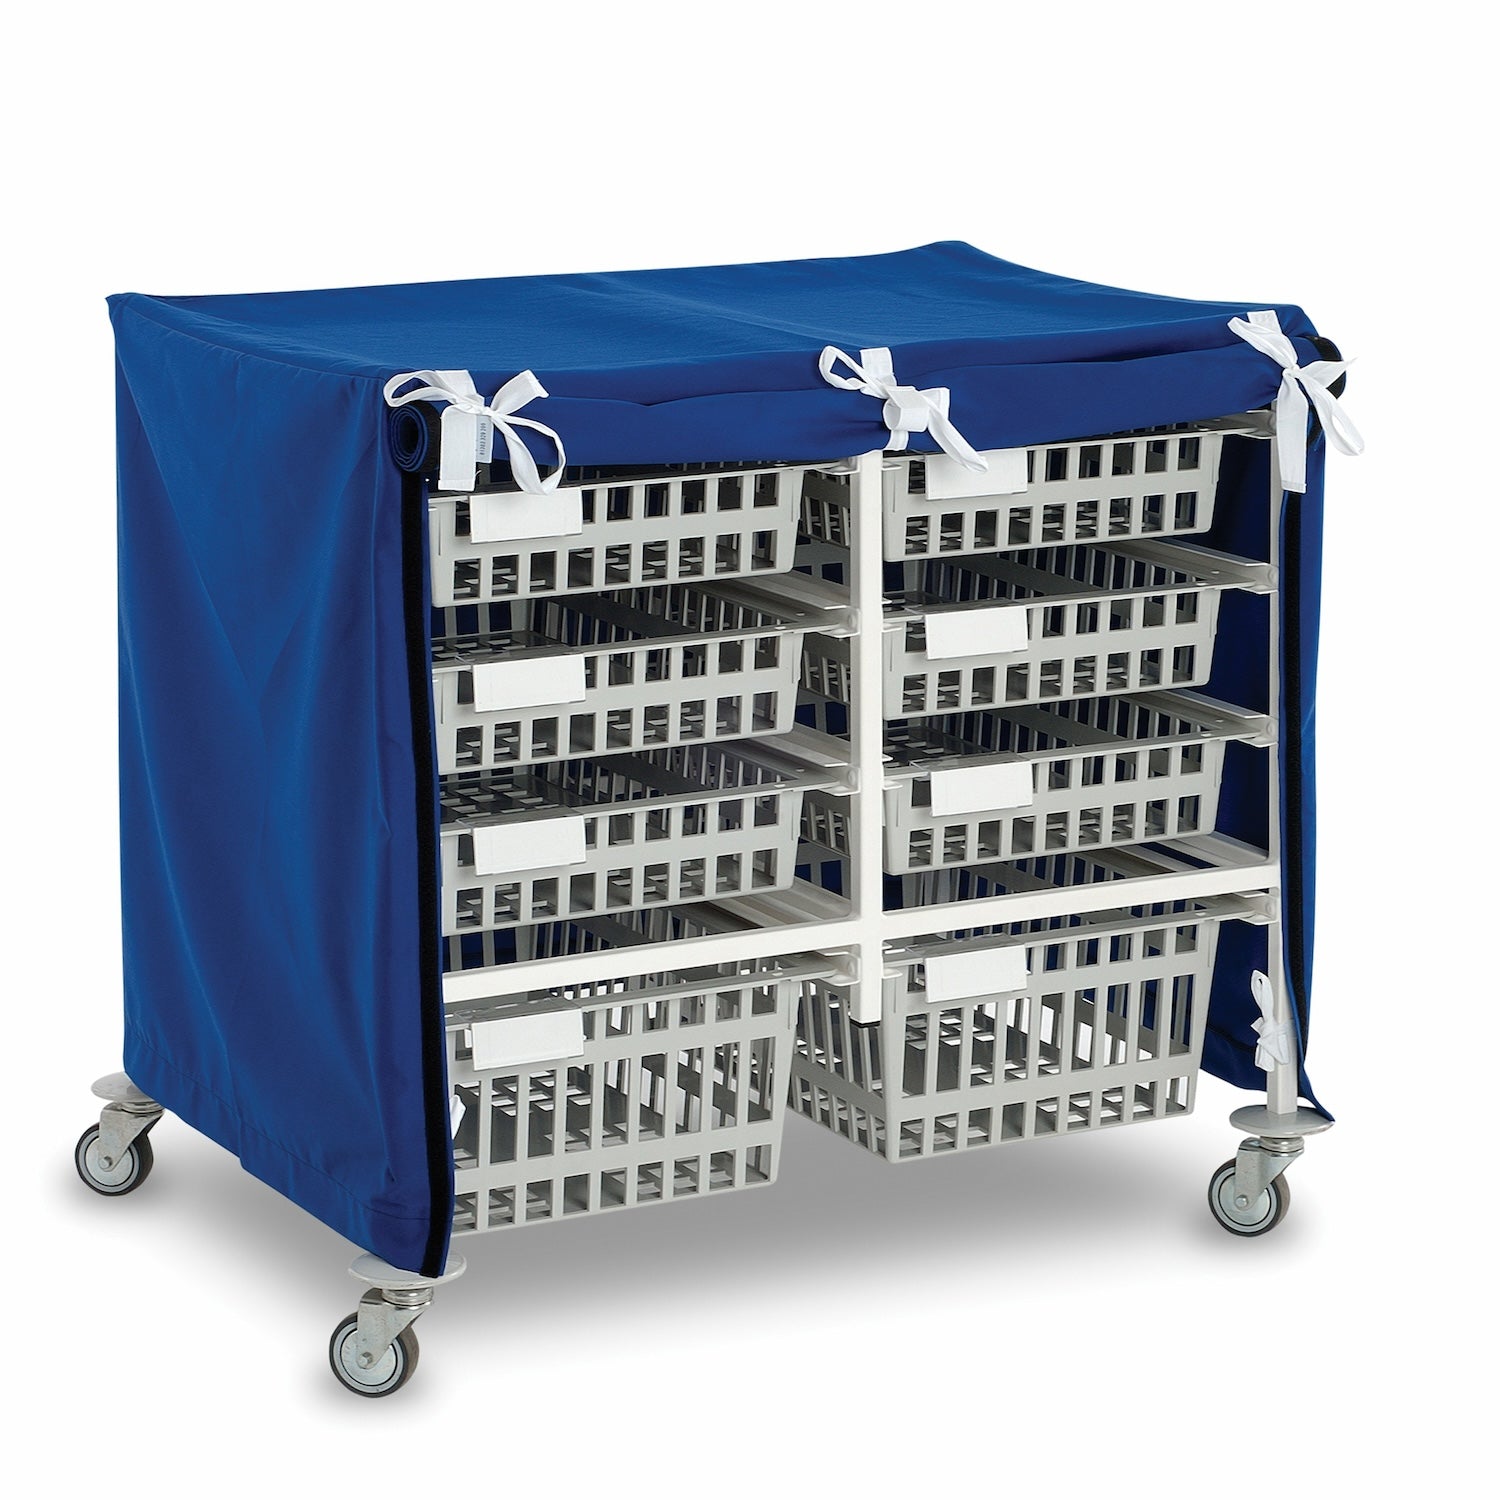 Trolley Covers | One & Twin Half Section | 840H x 650W x 445D mm (1)